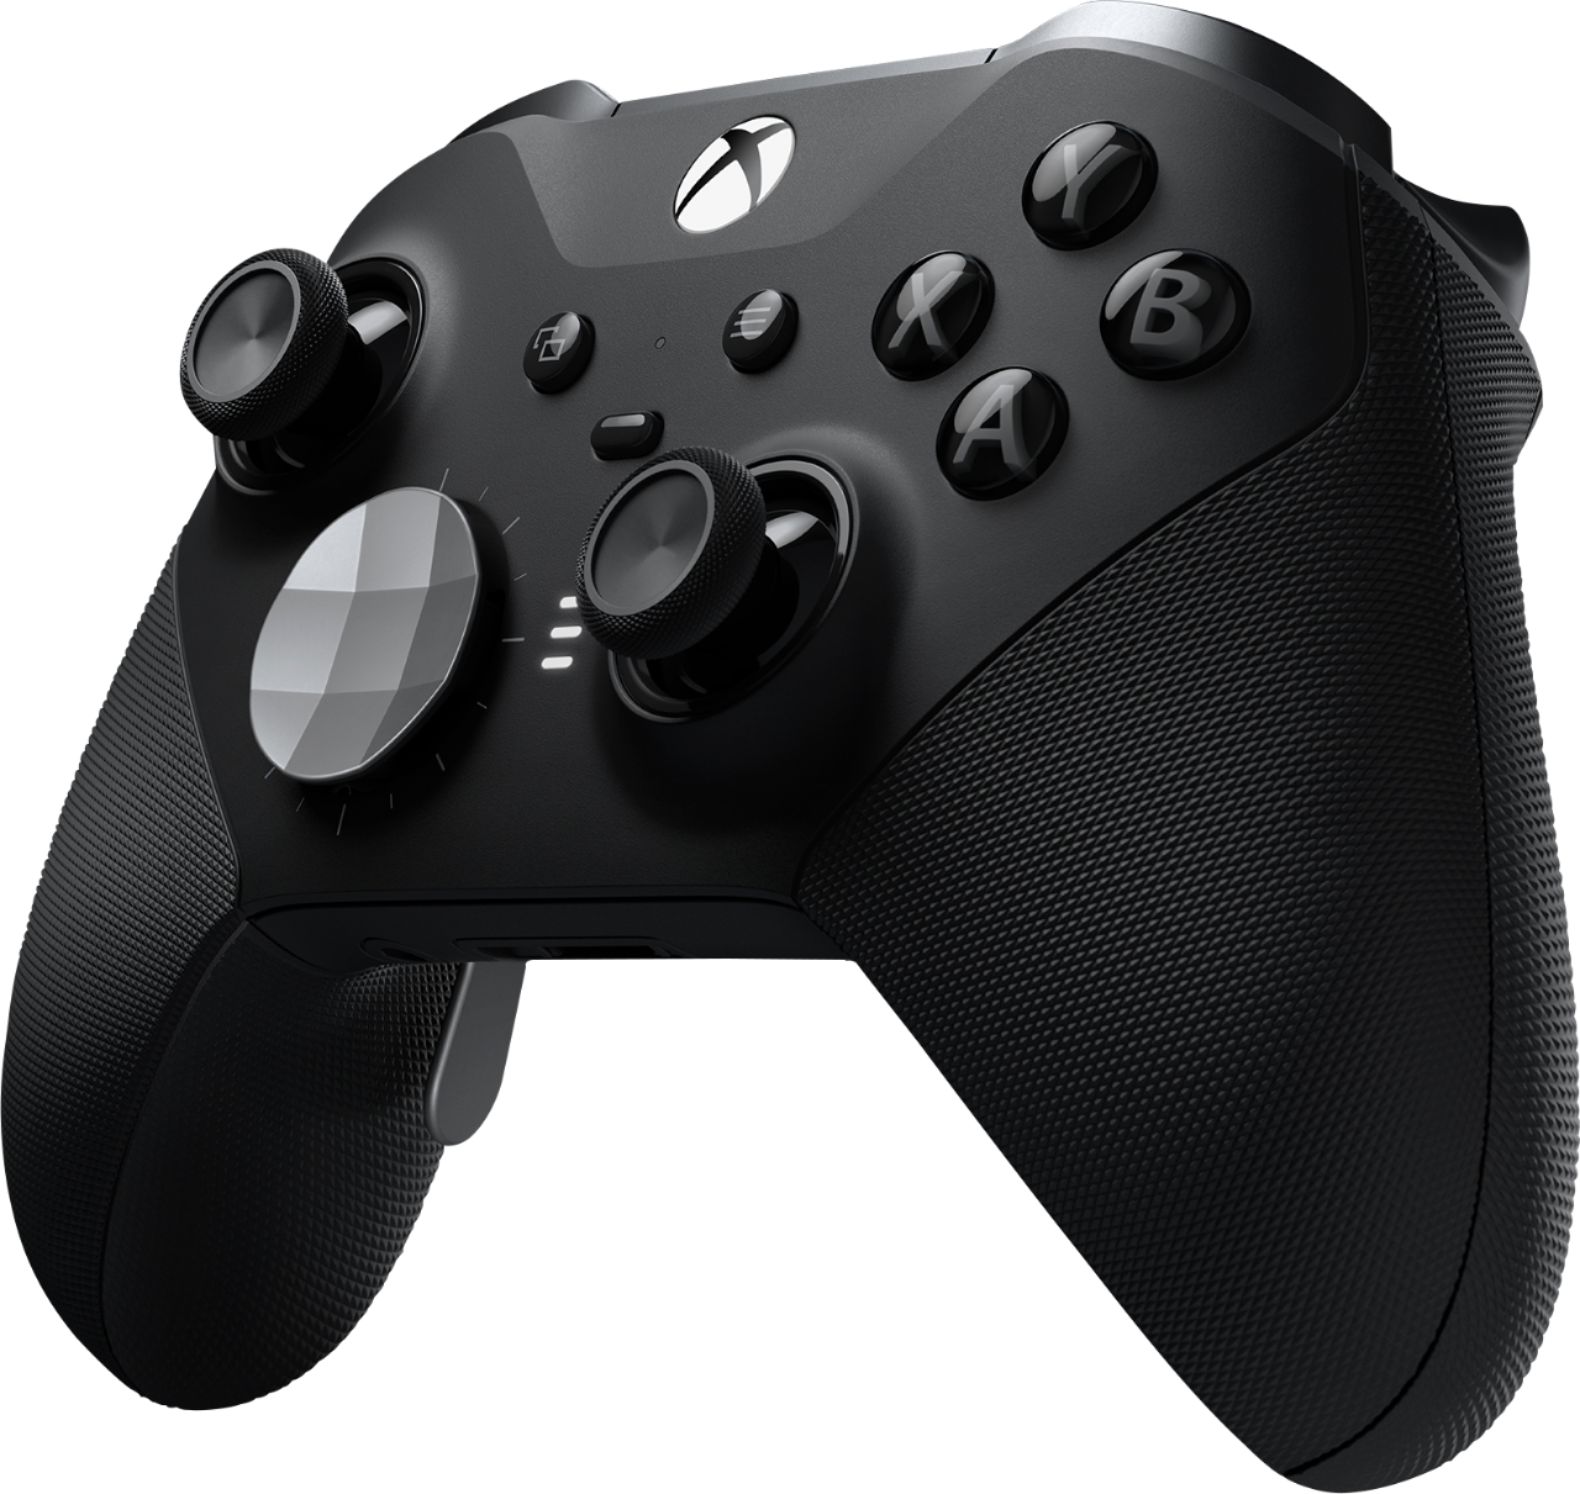 Zoom in on Left Zoom. Microsoft - Xbox Elite Wireless Controller Series 2 for Xbox One, Xbox Series X, and Xbox Series S - Black.